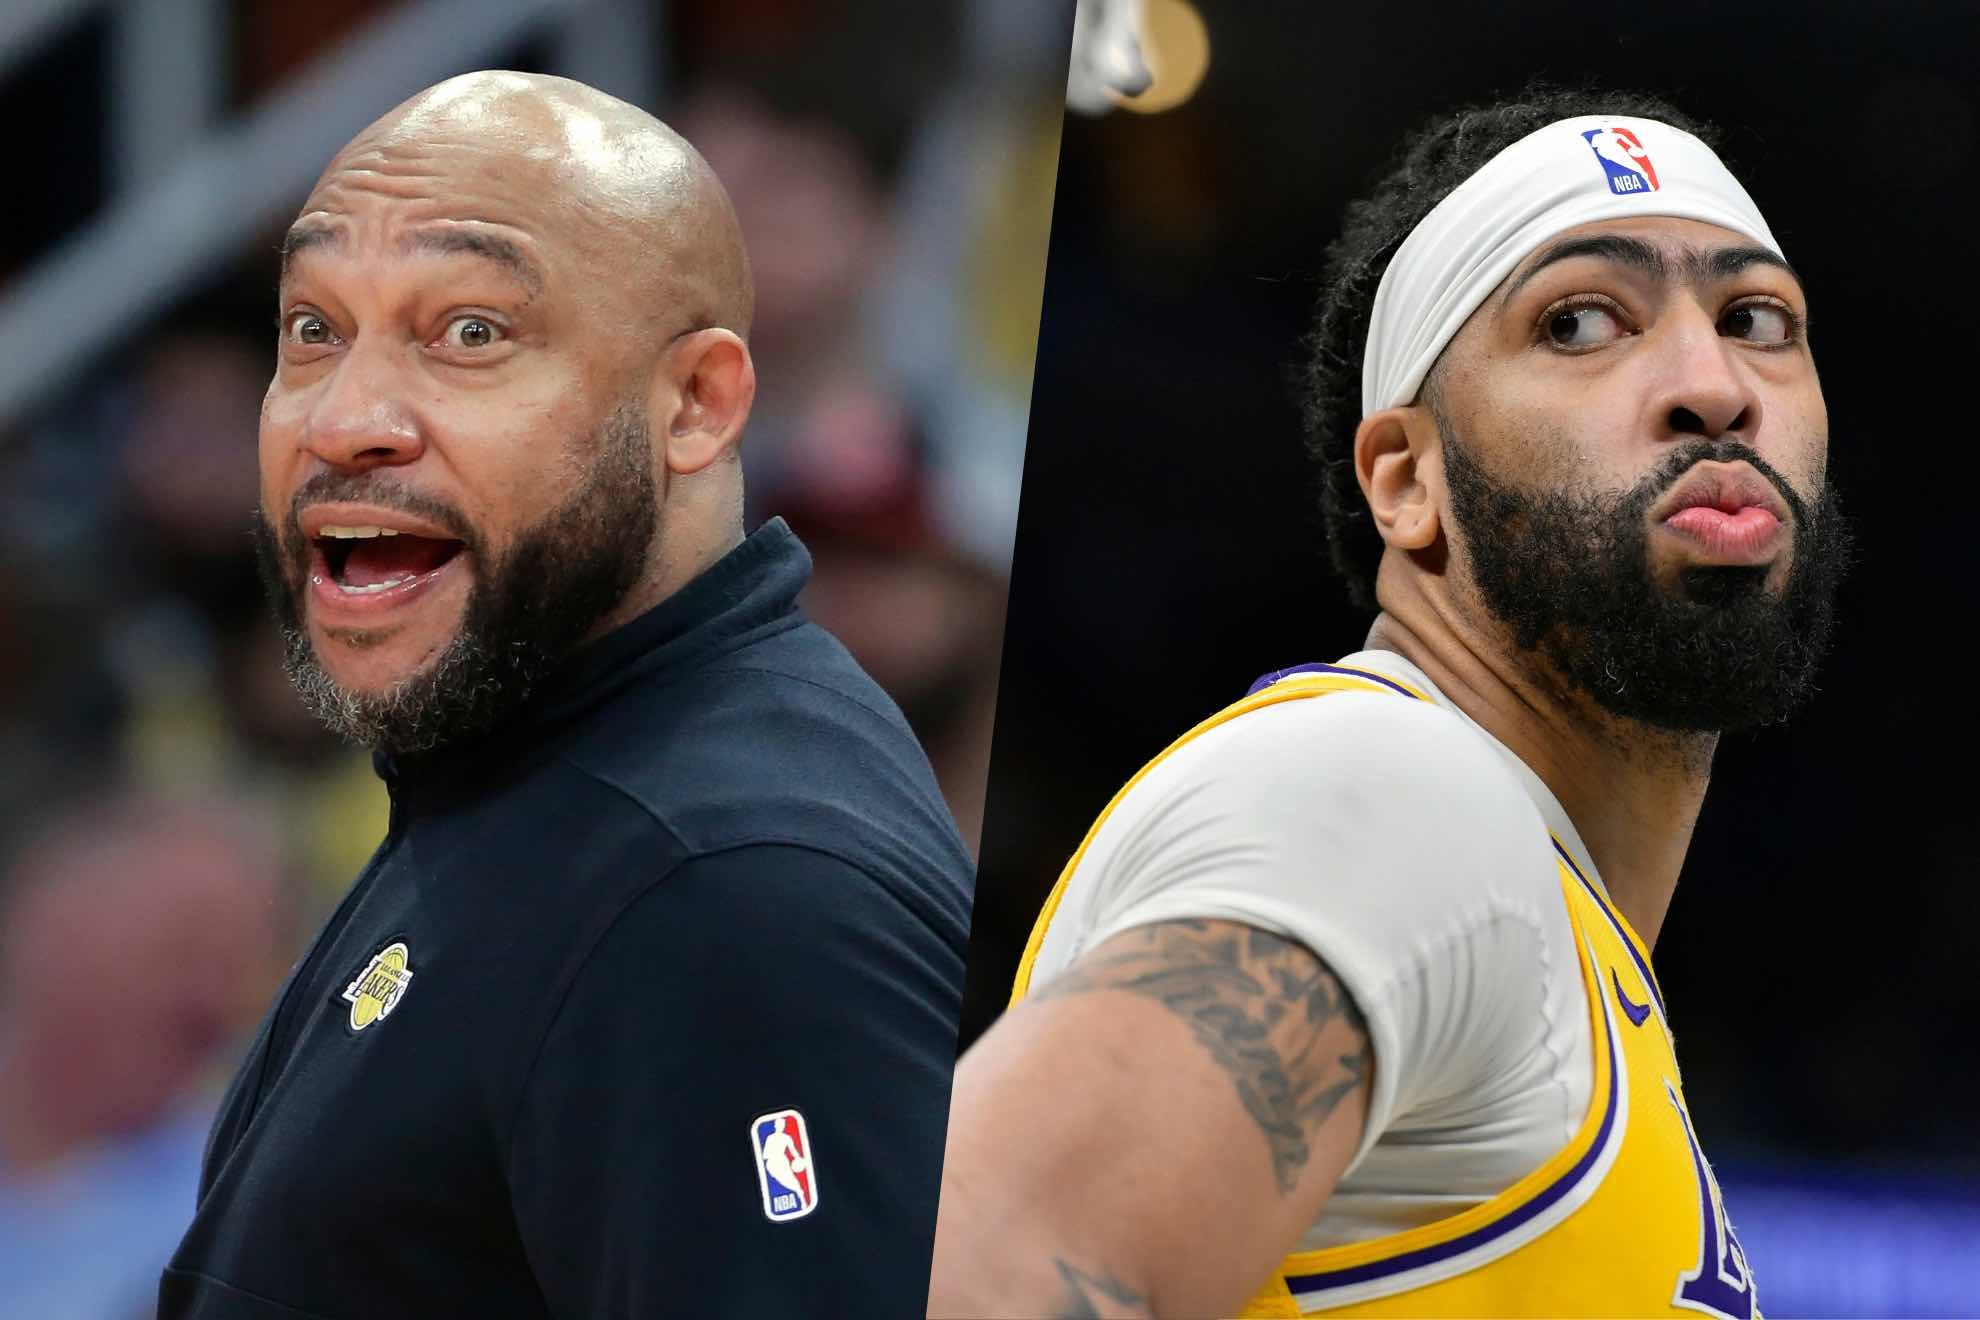 Darvin Ham and Anthony Davis had some disagreements about Game 2